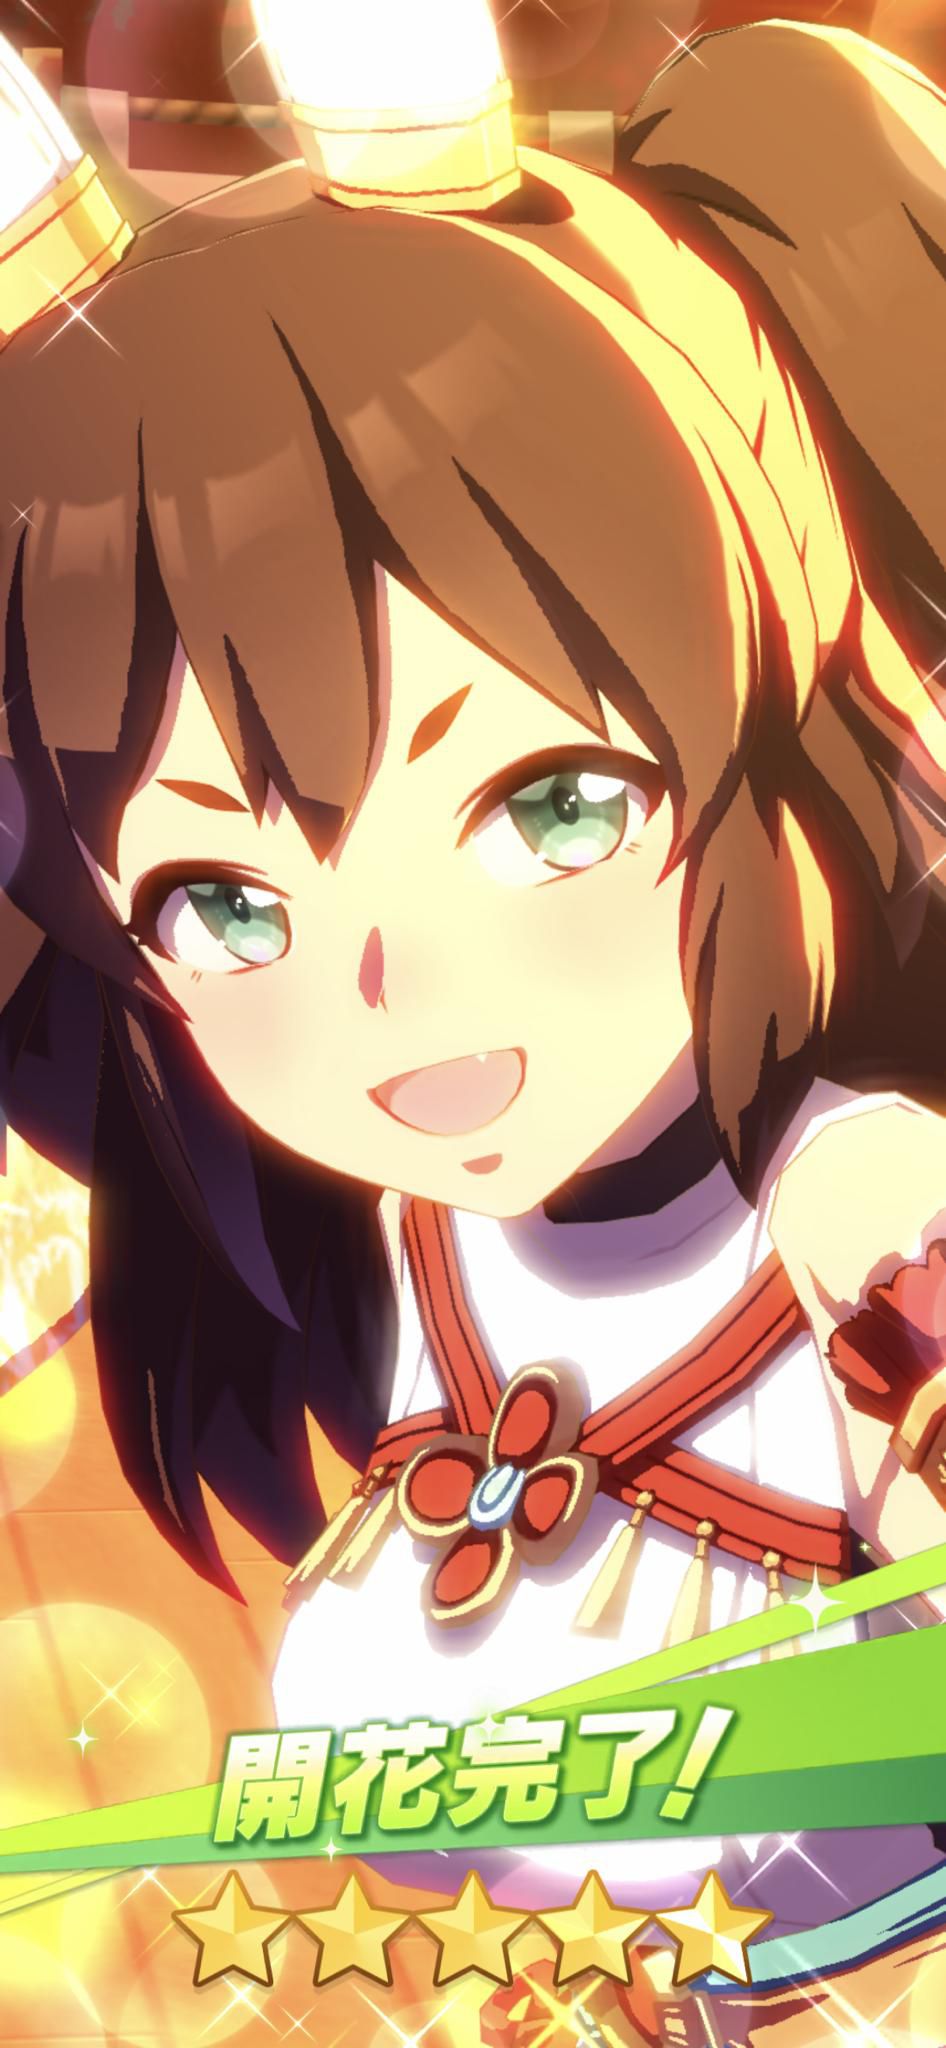 【Good news】Uma Musume will implement the echiechi character of balloon for 3 consecutive times 1